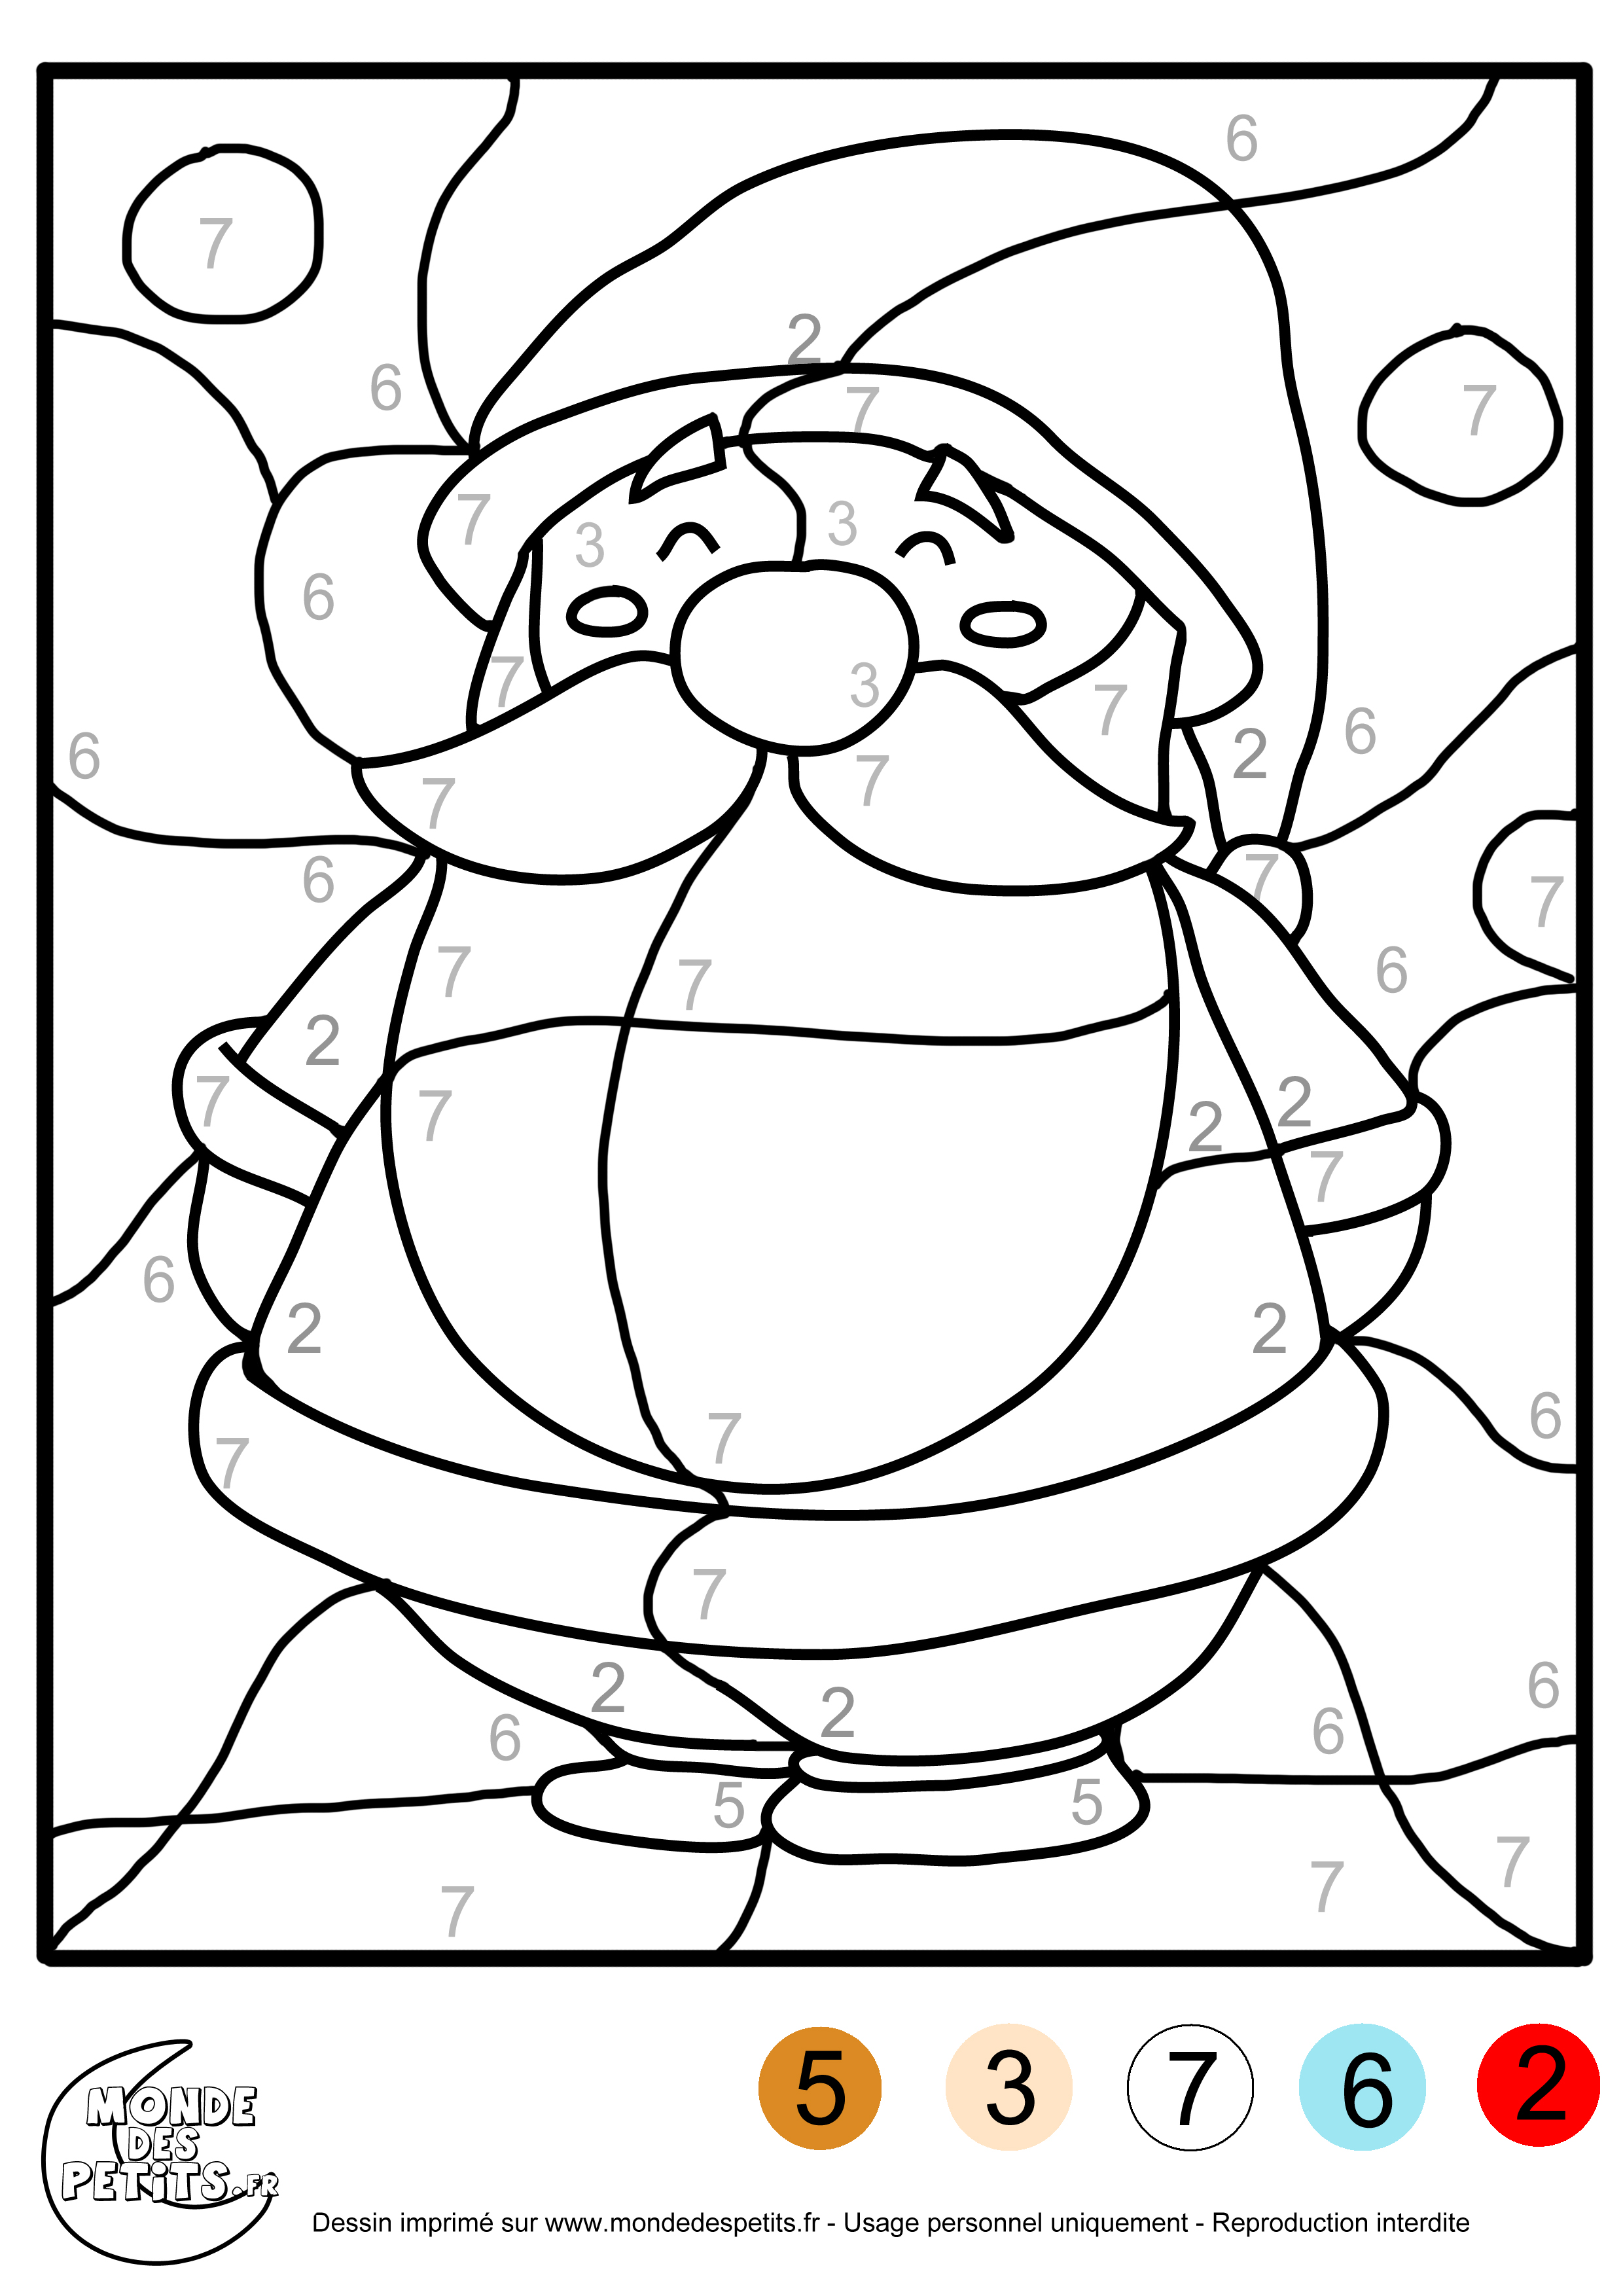 scene bible coloring sheets 03 Bible Coloring Pages Pinterest